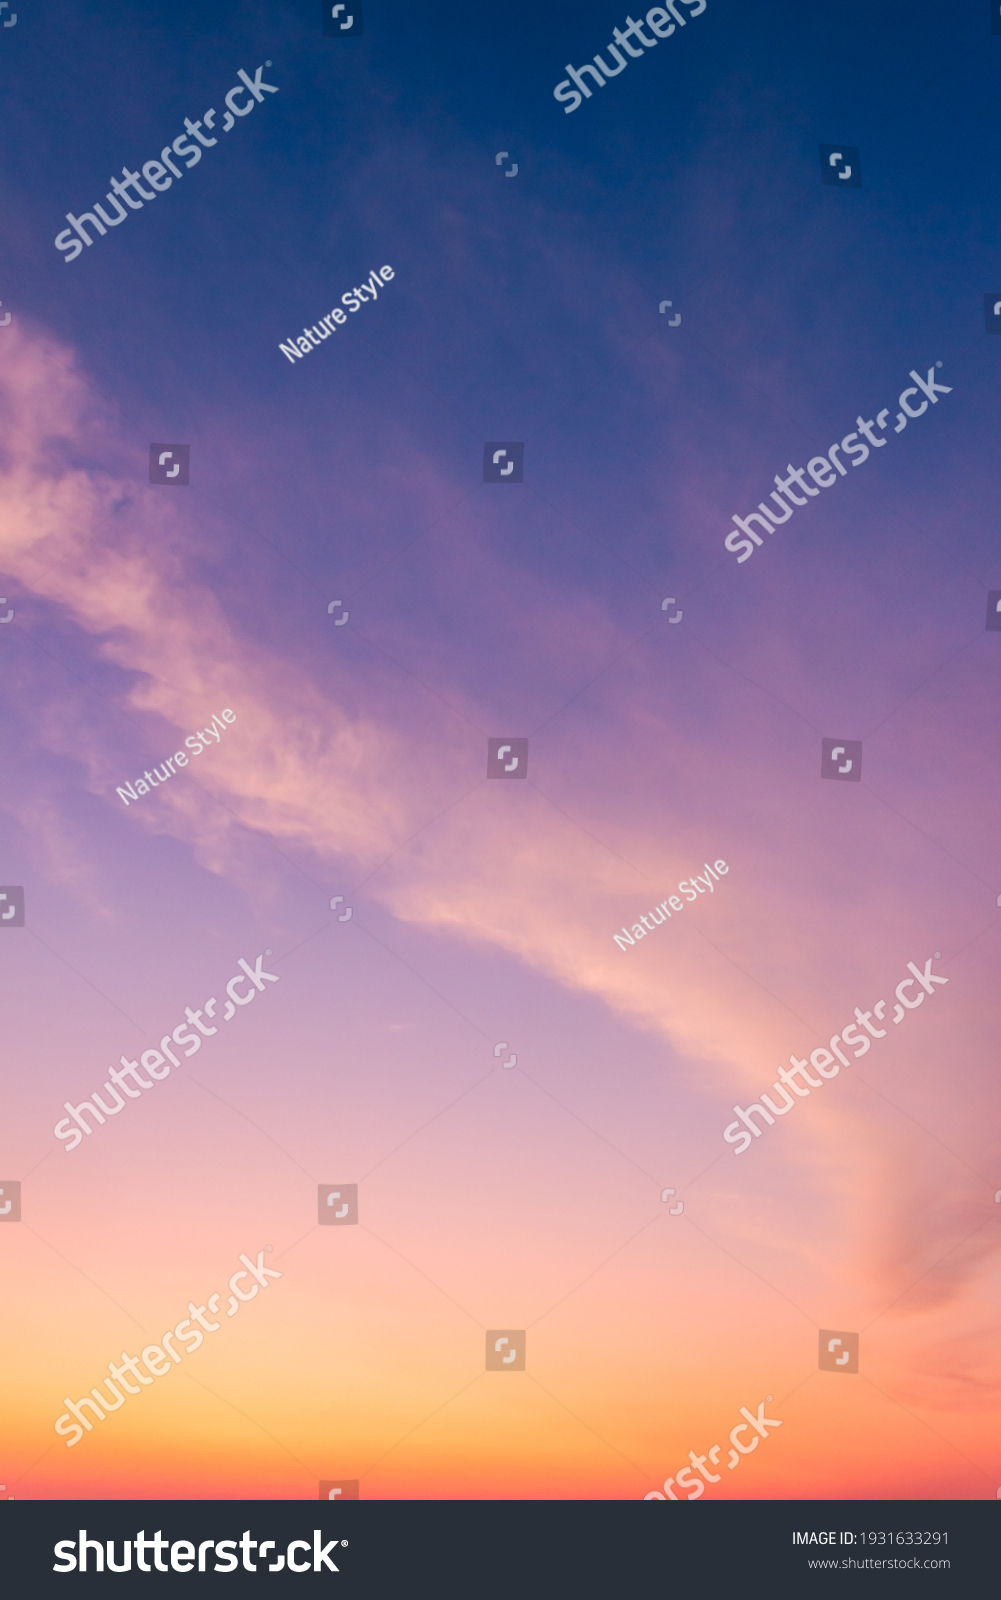 Dusk Vertical,Sunset Sky Twilight in the Evening with colorful Sunlight and Dark blue Sky, Majestic summer nice sky vertical. #1931633291